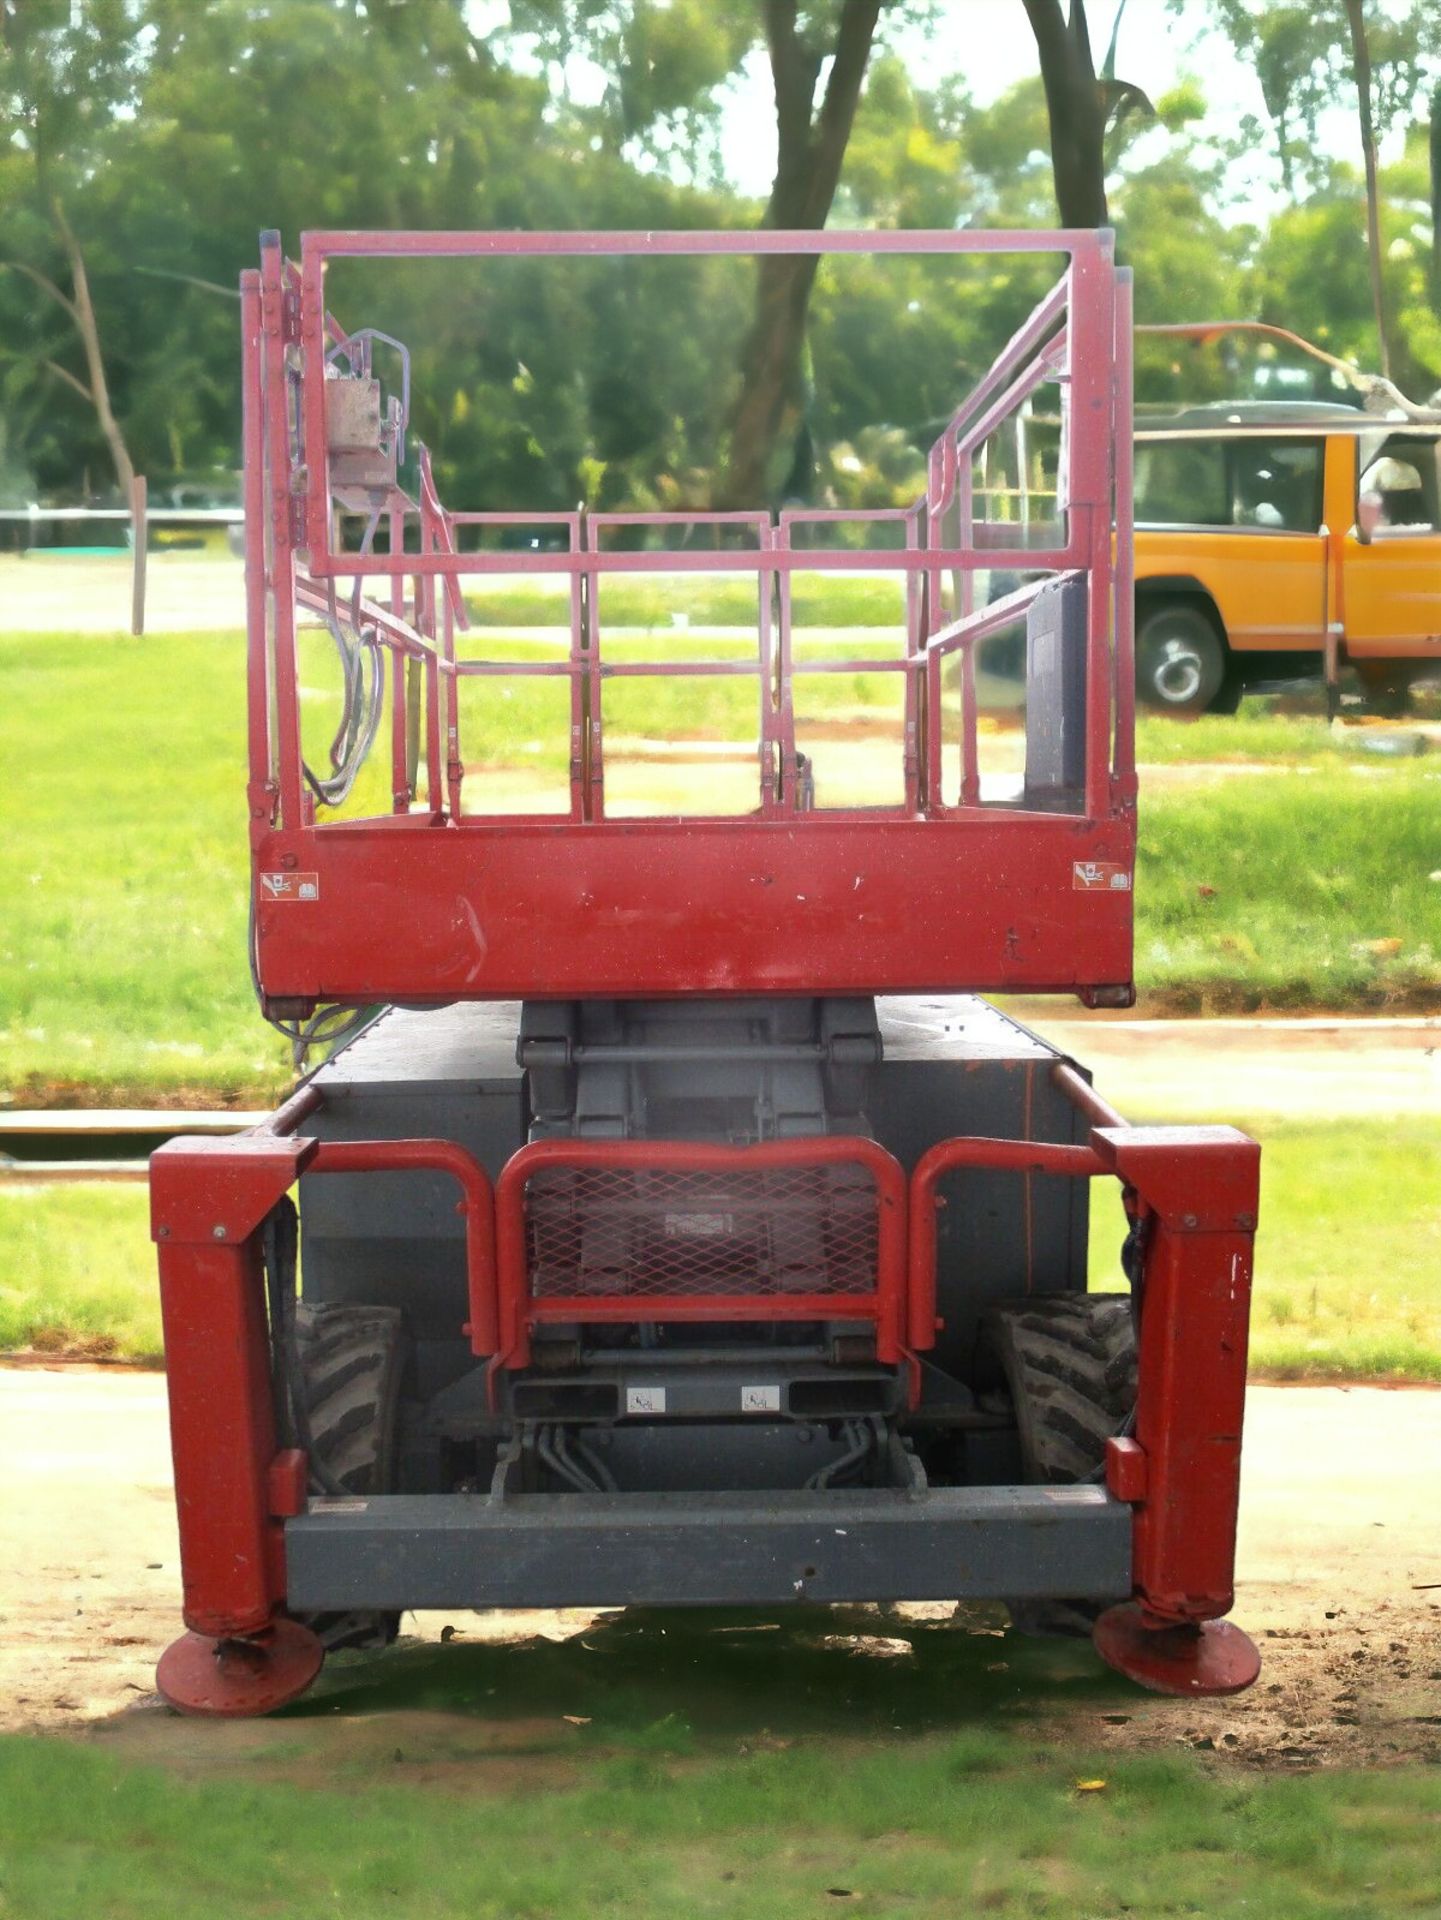 OWN THE SKIES WITH THE POWERFUL 2011 SKYJACK 6832 SCISSOR LIFT ACCESS PLATFORM - Image 4 of 12